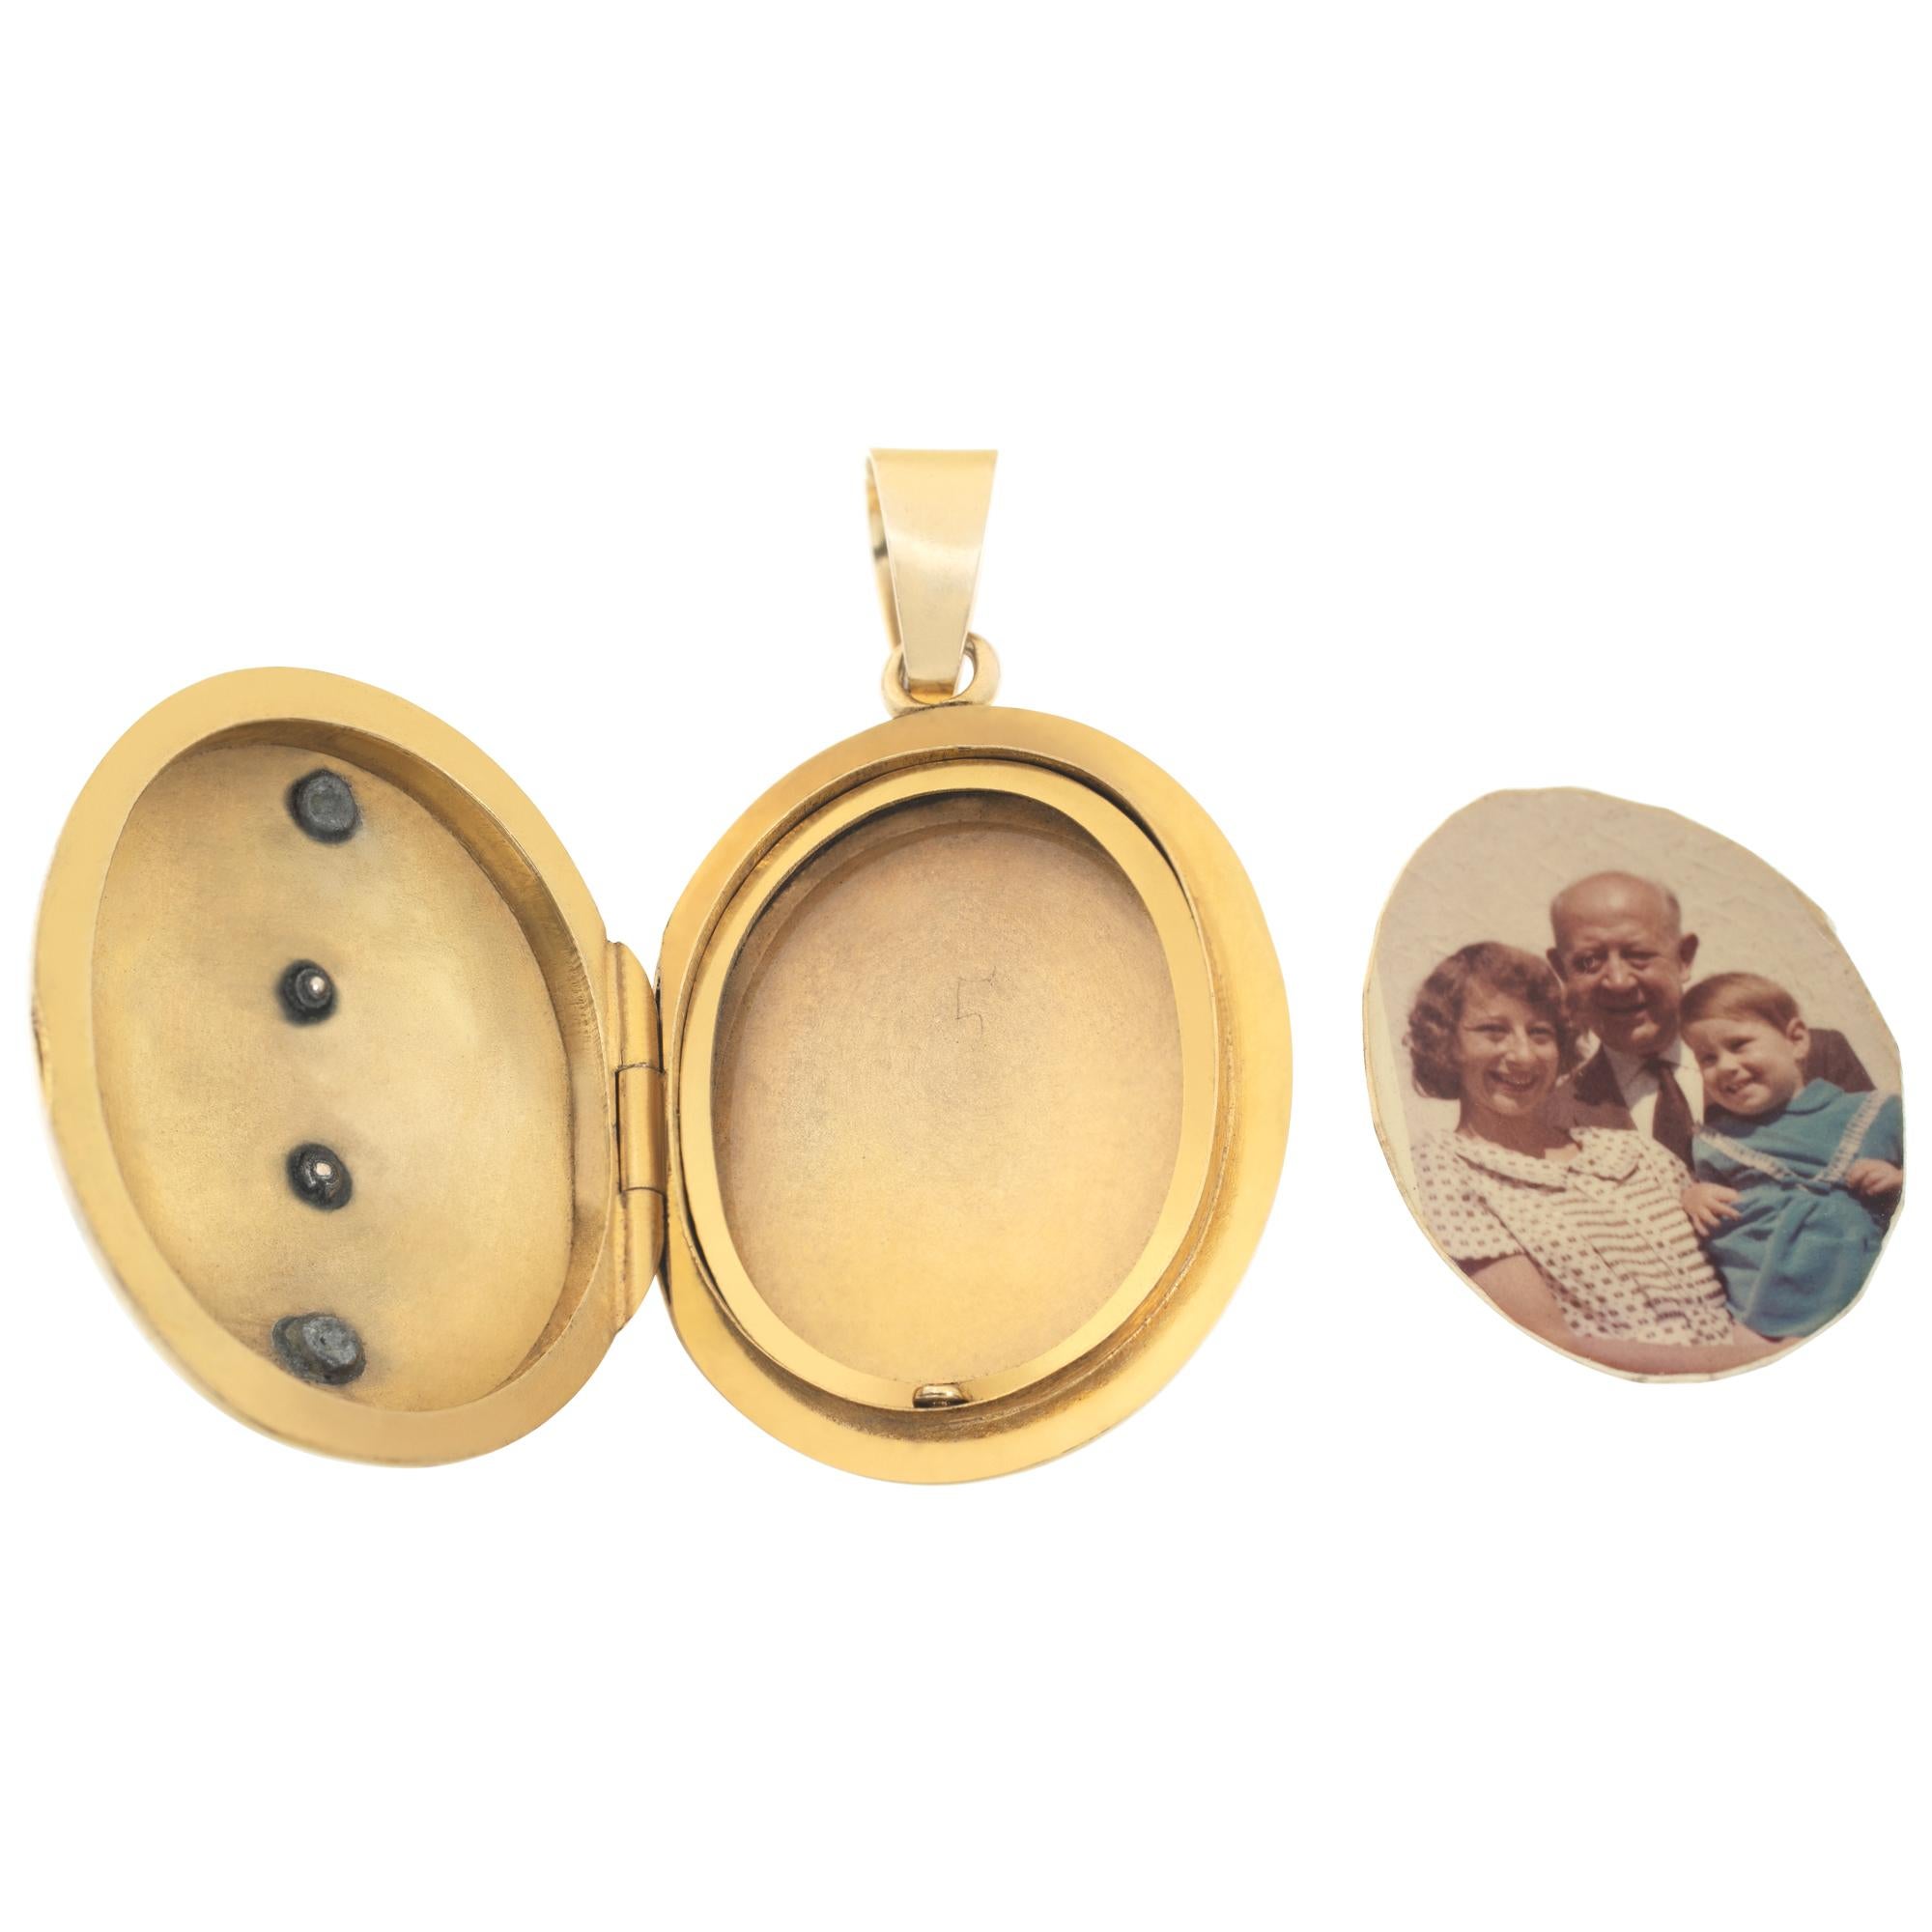 Etruscan Revival Victorian era 18k yellow gold locket / pendant In Excellent Condition For Sale In Surfside, FL